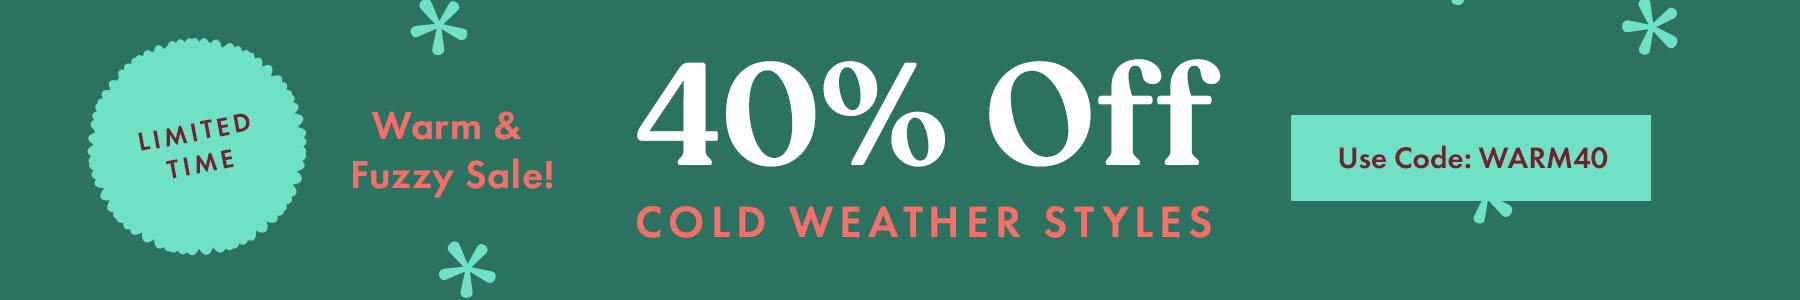 40% Off Cold Weather Styles. Use Code: WARM40